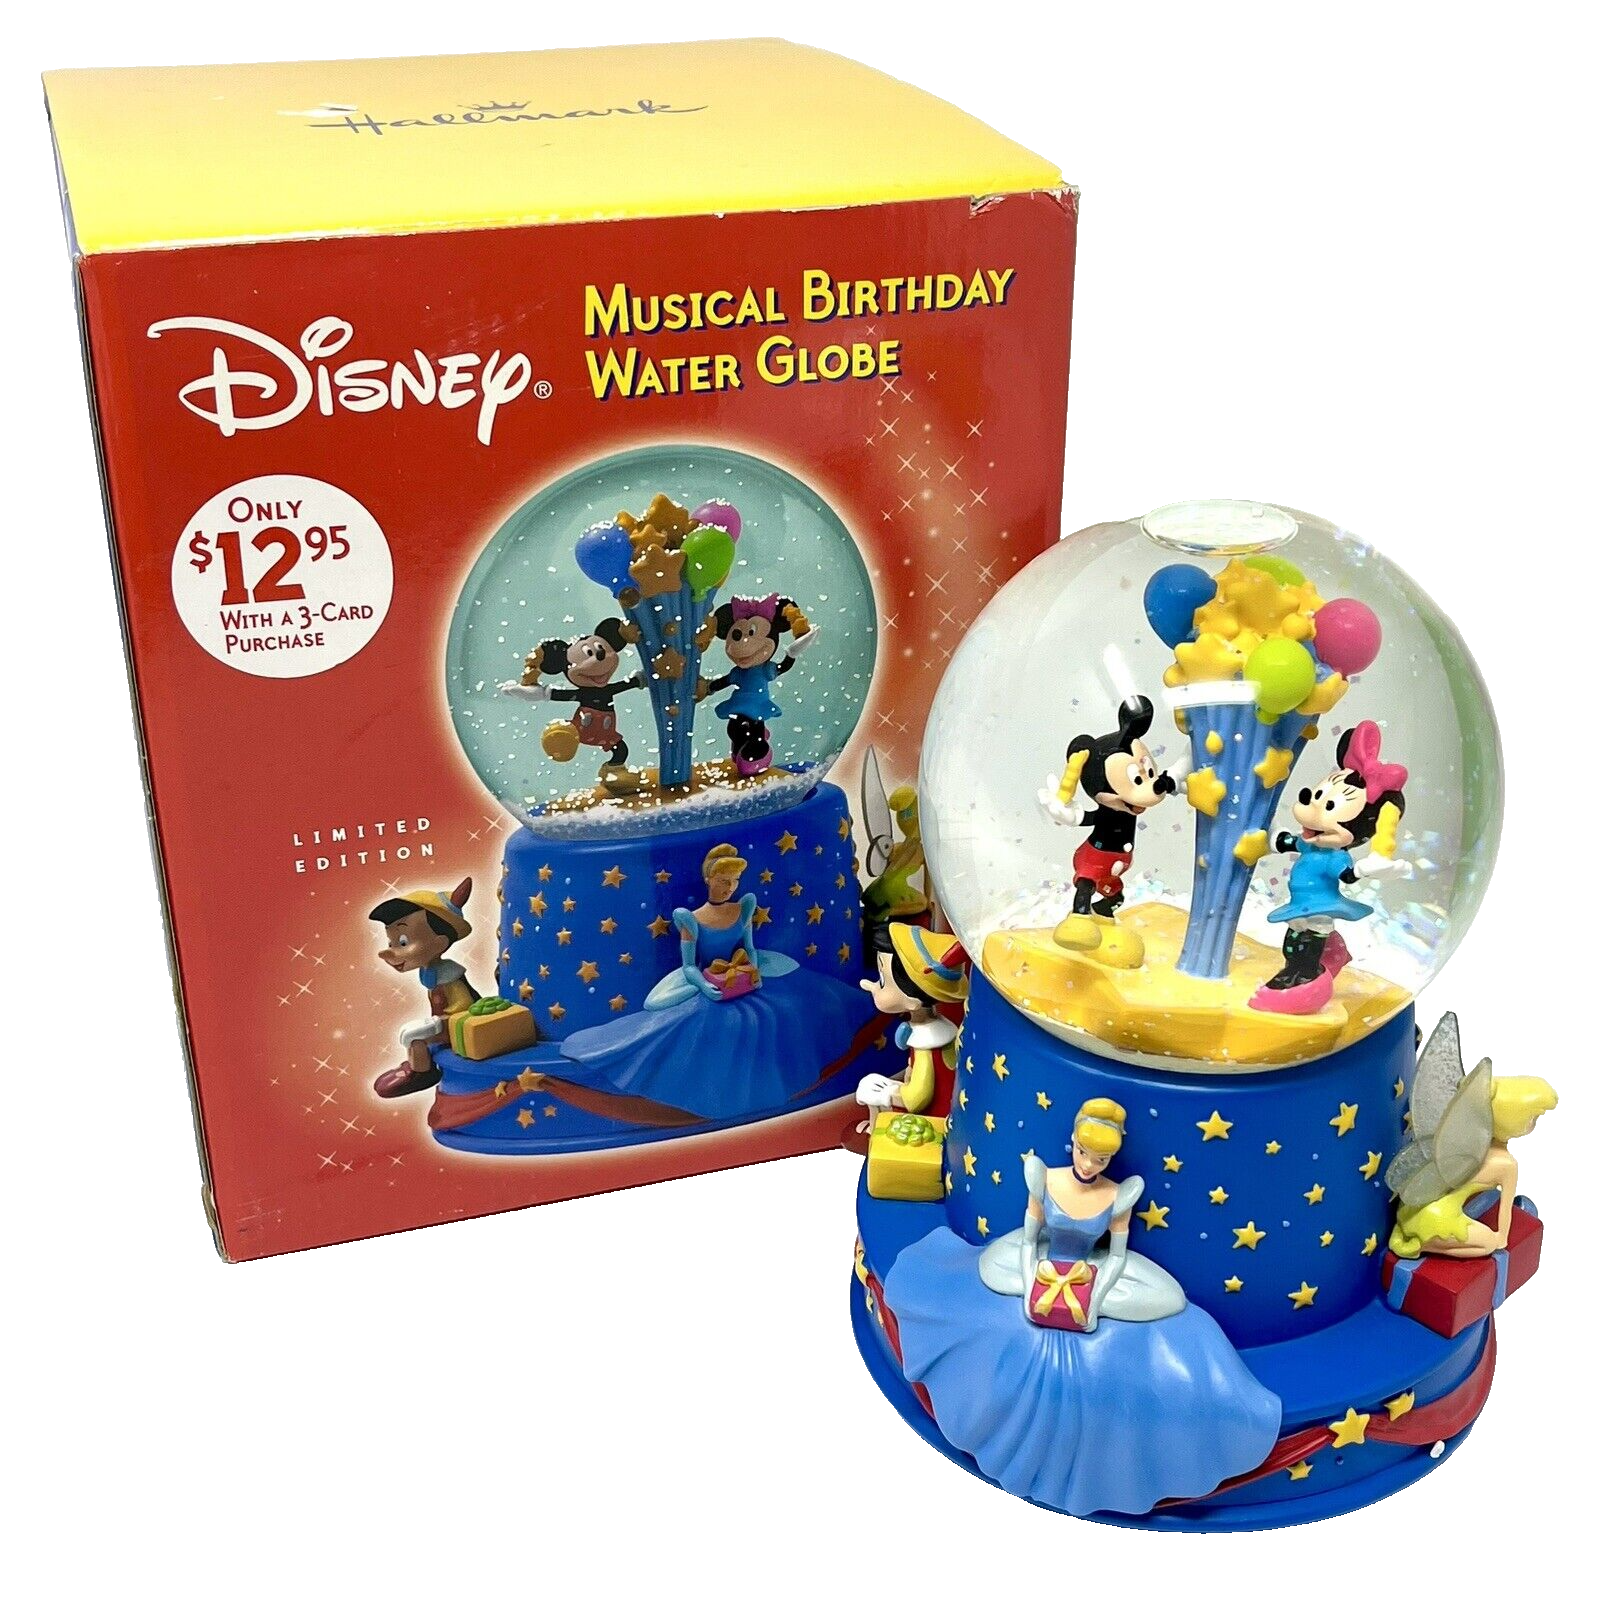 Disney's Musical Birthday Water Globe Limited Edition 2001 - $28.49